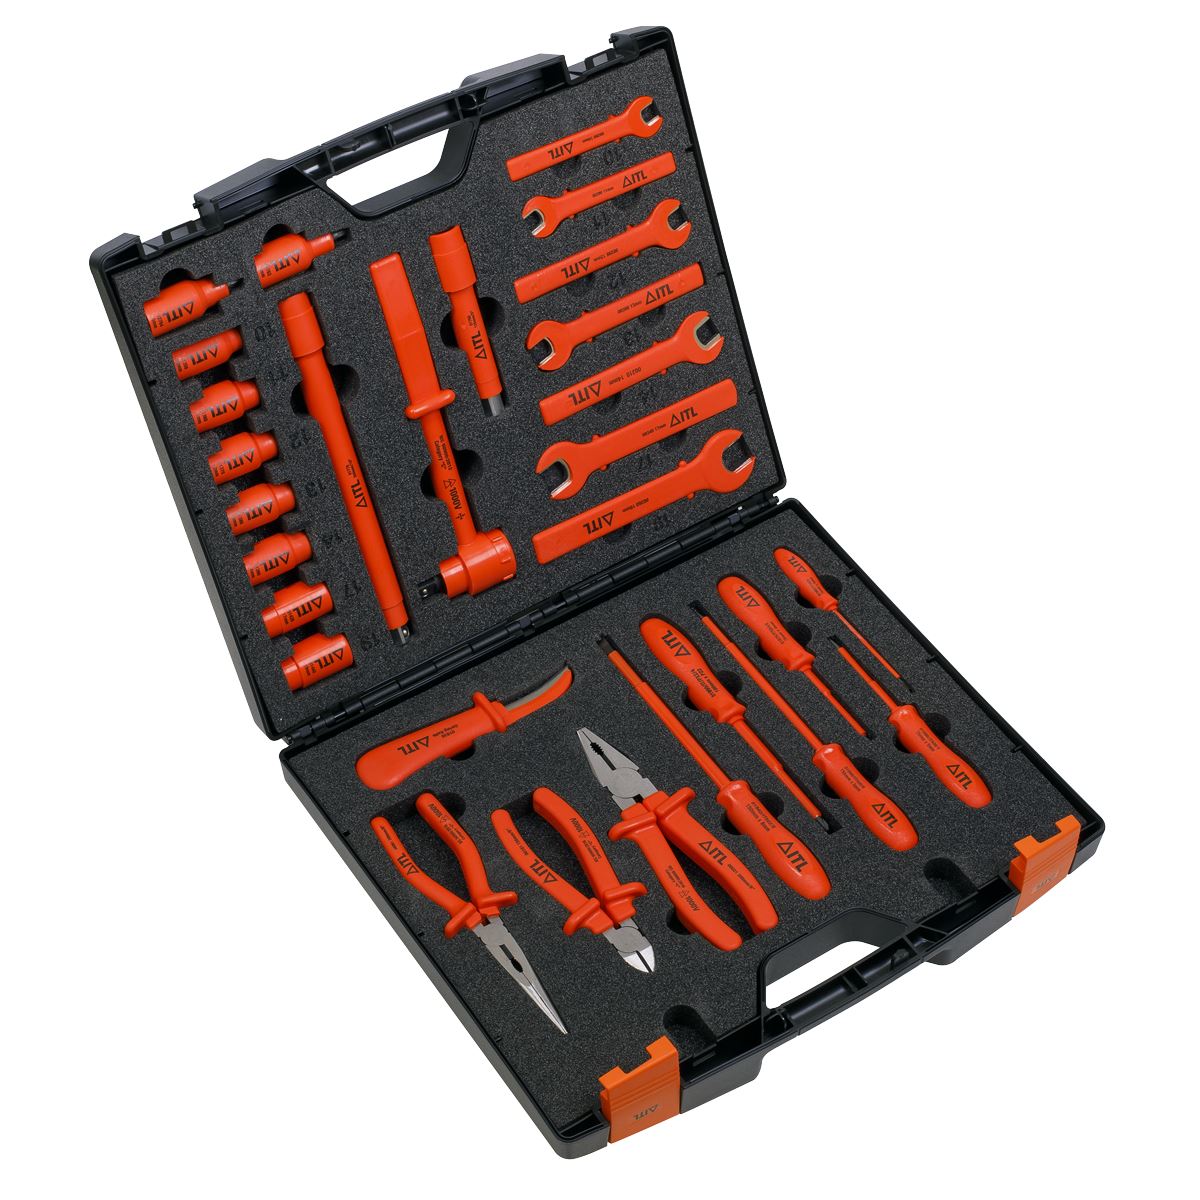 Sealey Premier Insulated Tool Kit 29pc